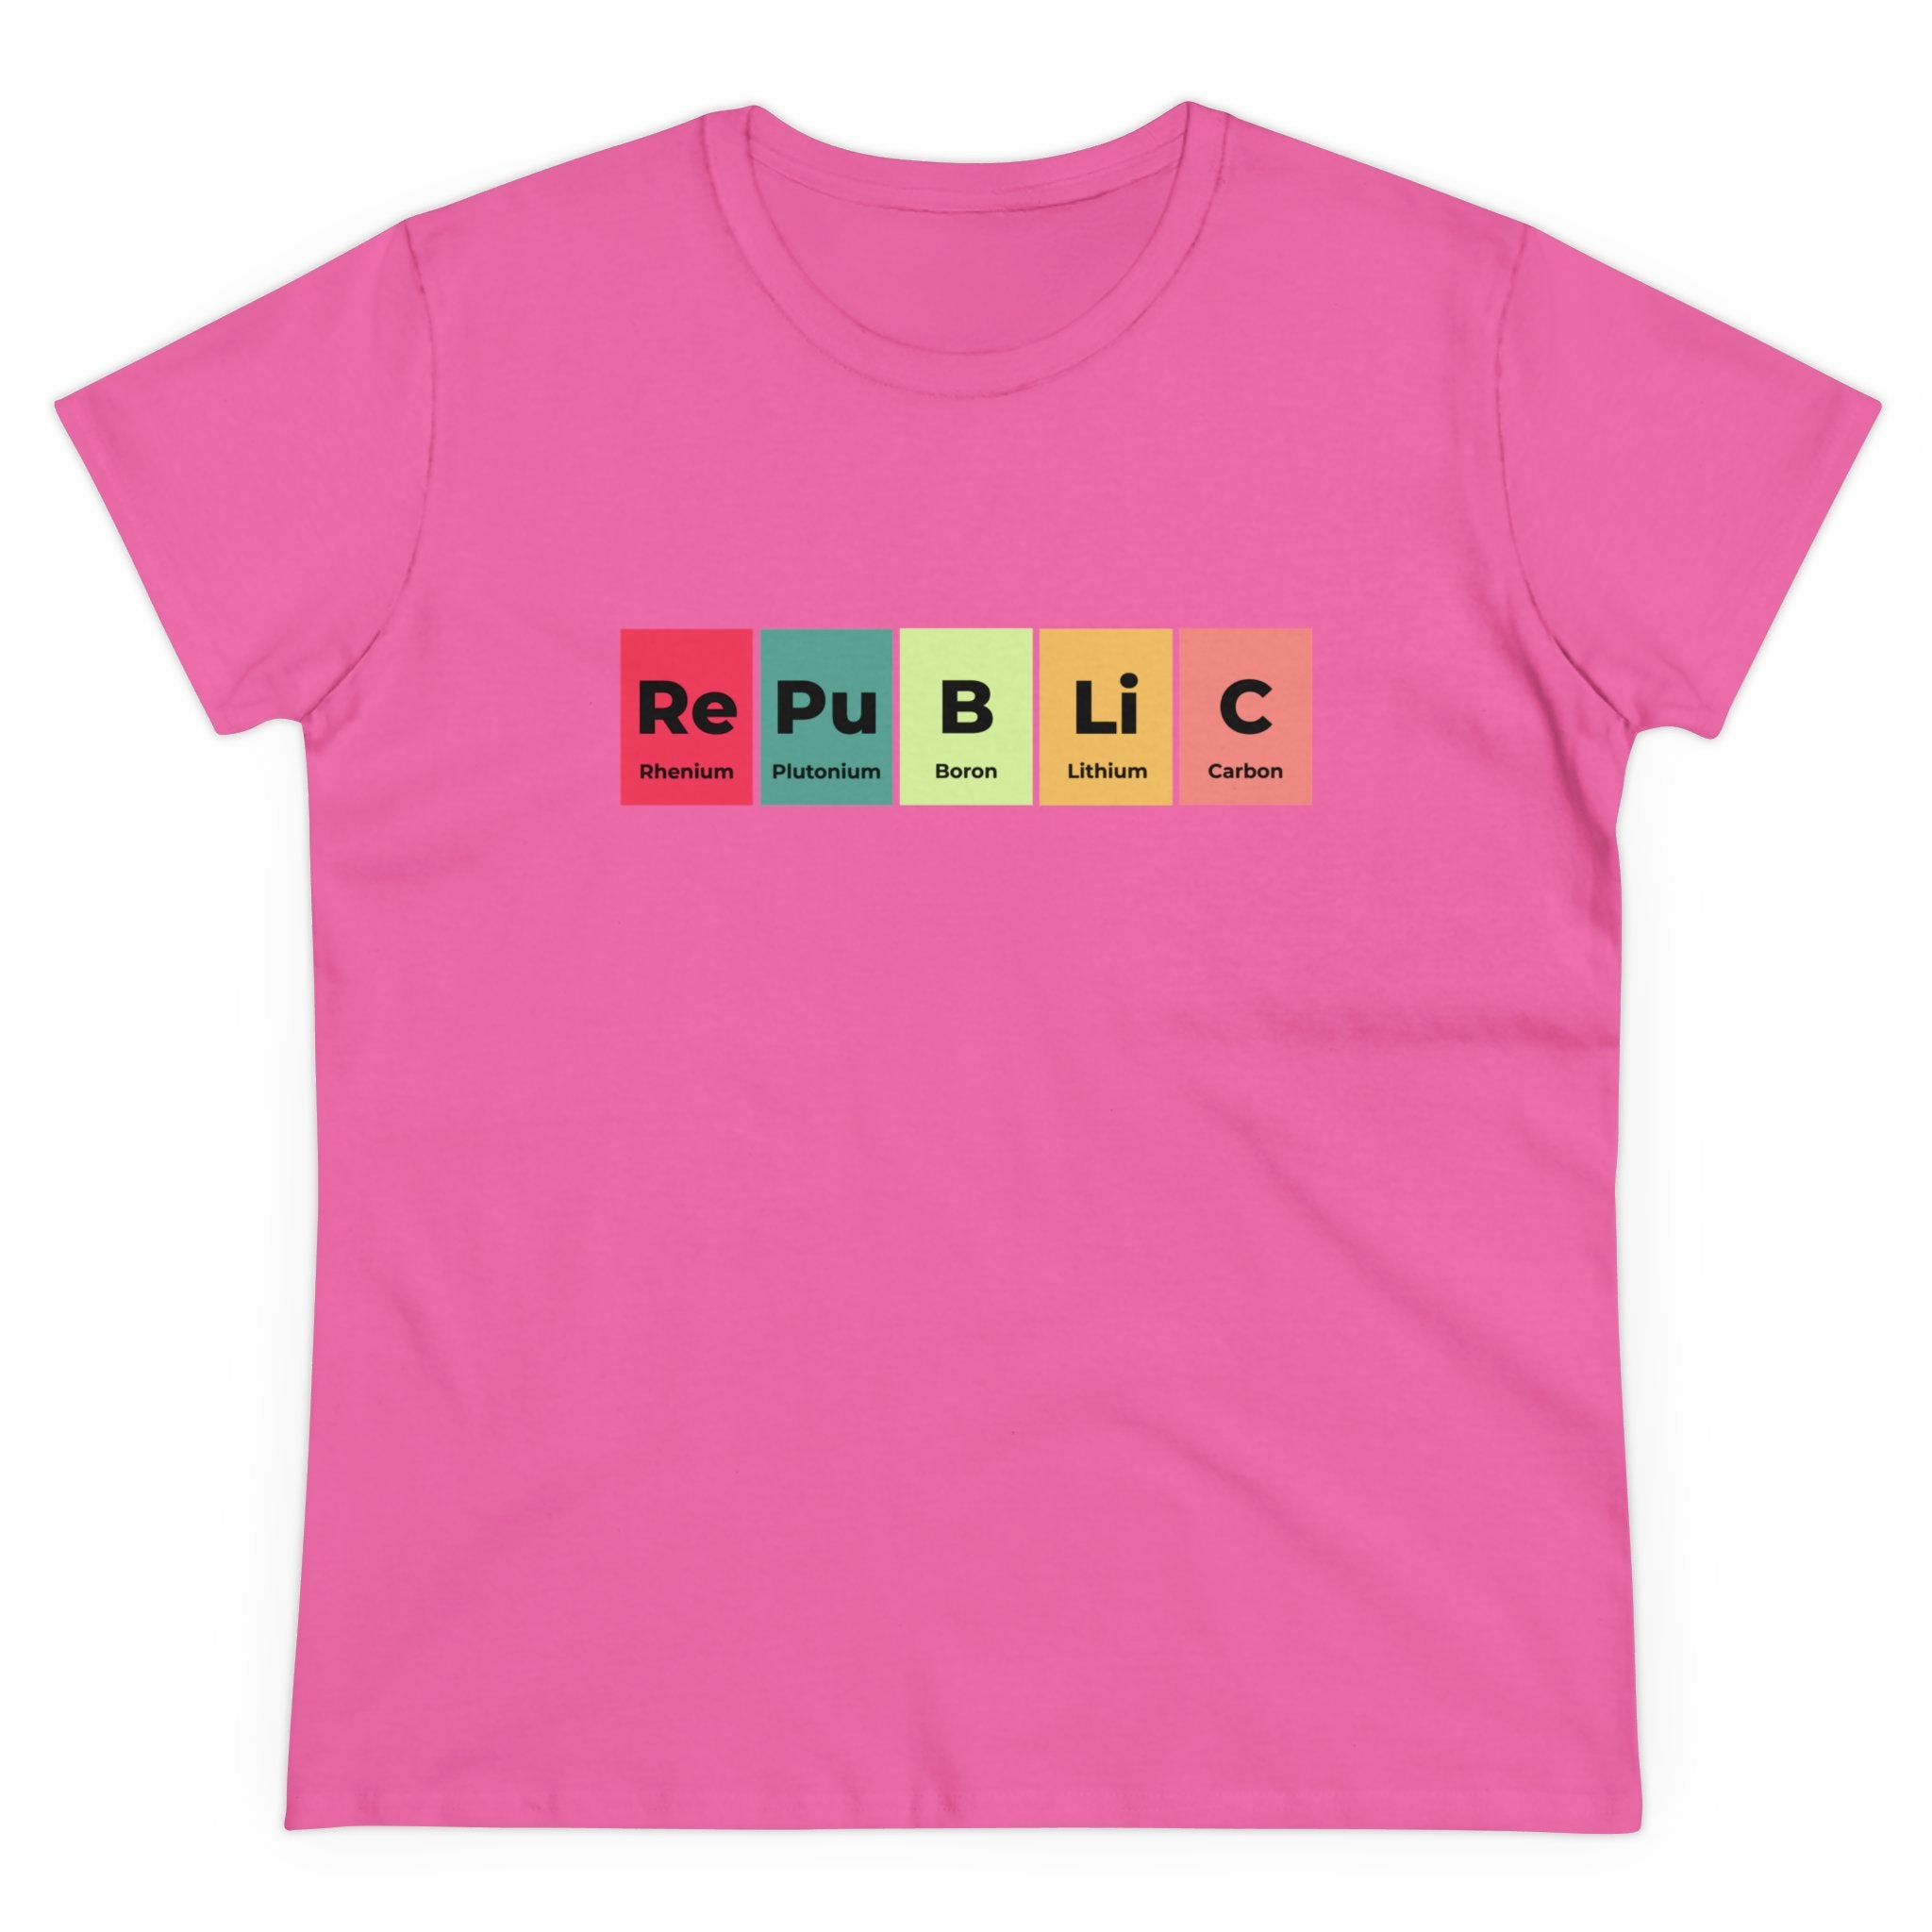 Republic - Women's Tee: Pink women's tee featuring the word "Republic" spelled out using illustrations of elements from the periodic table: Rhenium, Plutonium, Boron, Lithium, and Carbon. This fashionable and comfy t-shirt is perfect for showcasing your love for science.